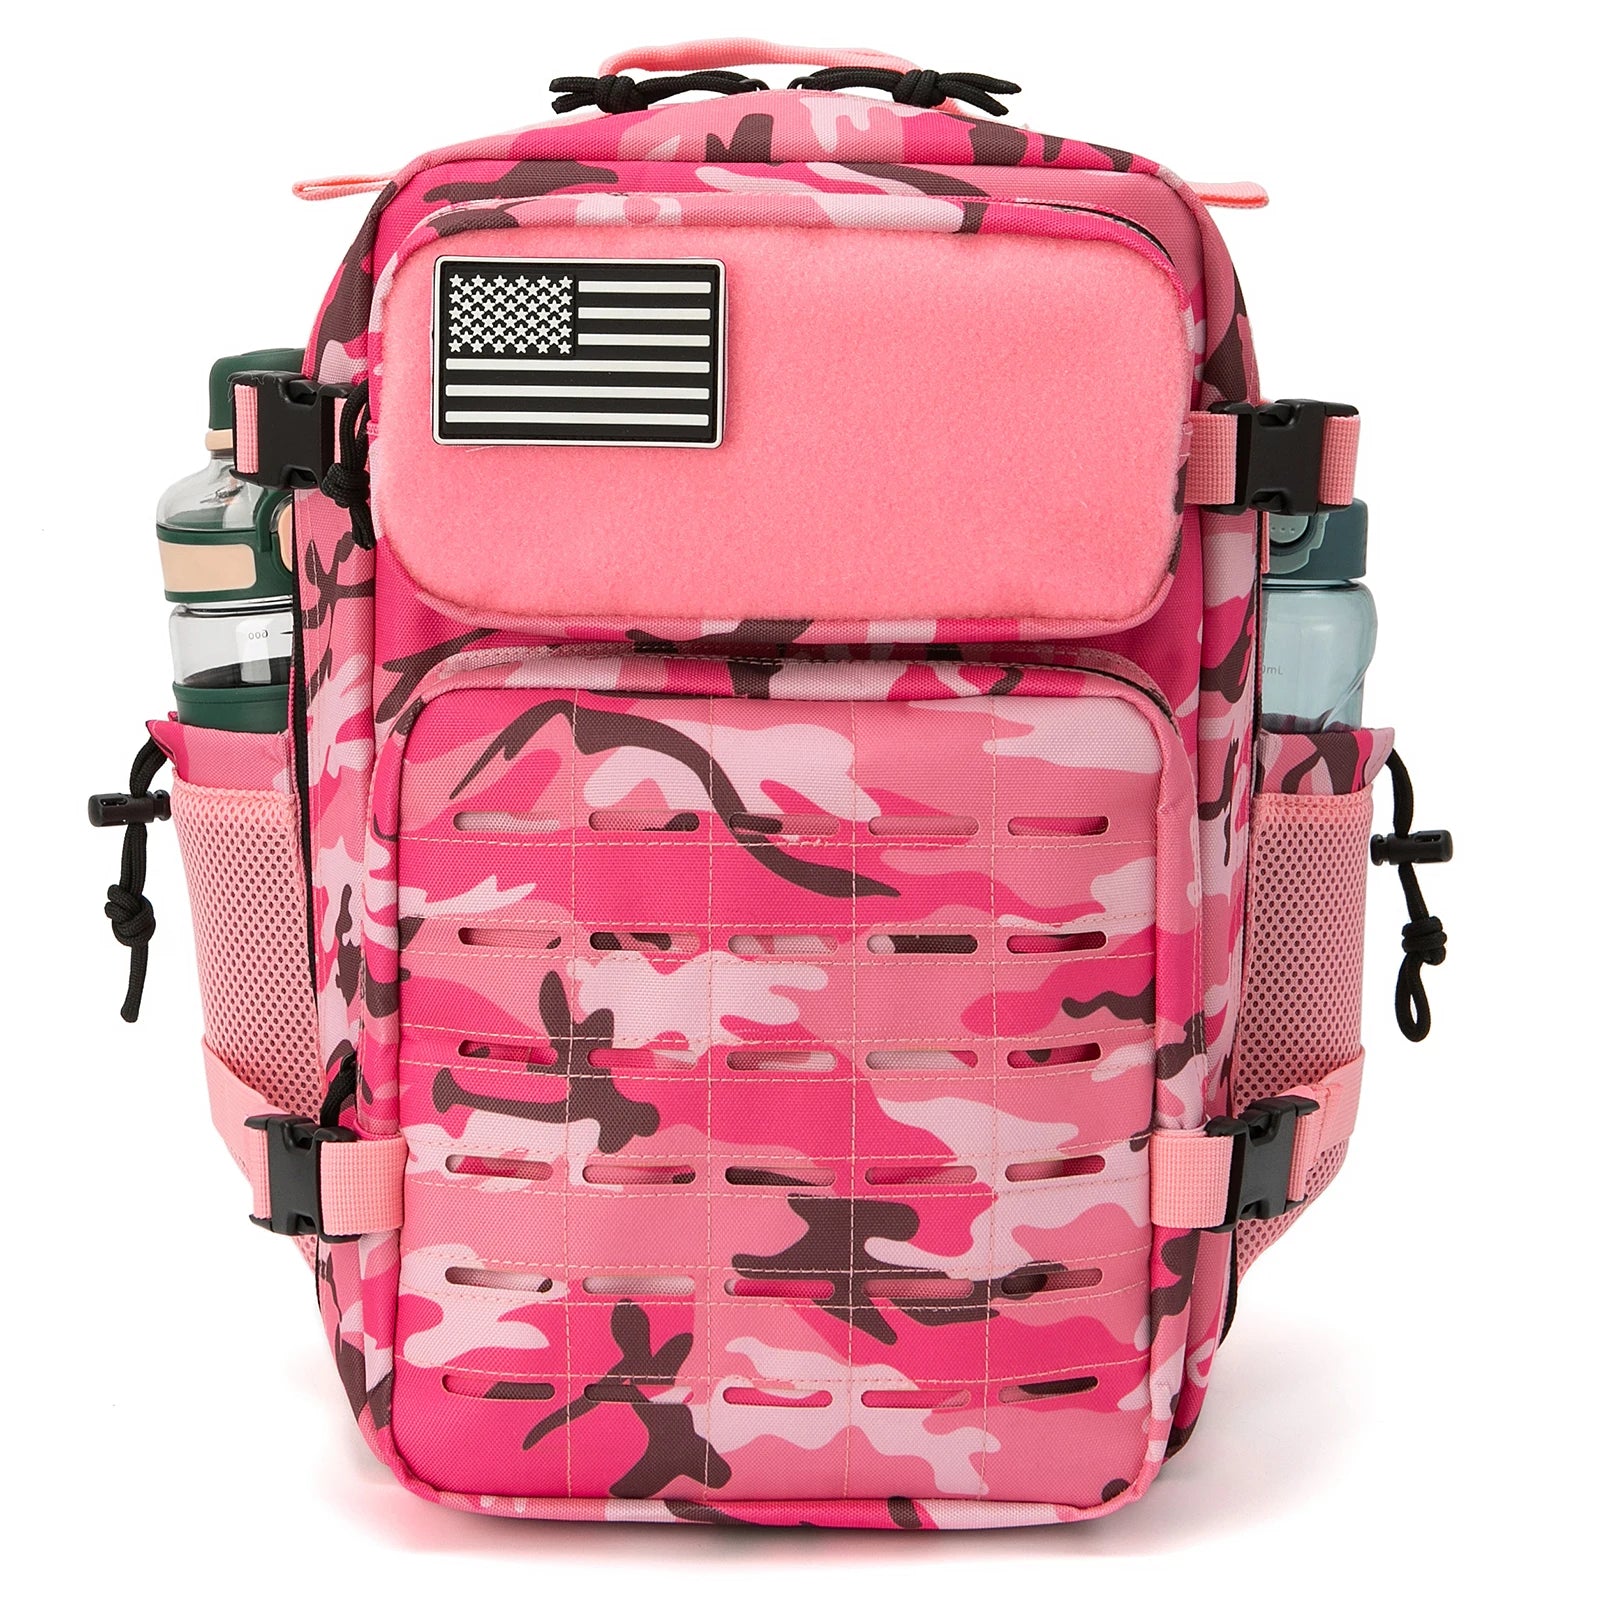 Pink Camo 25L Tactical Backpack Rucksack With Water Bottle Holders